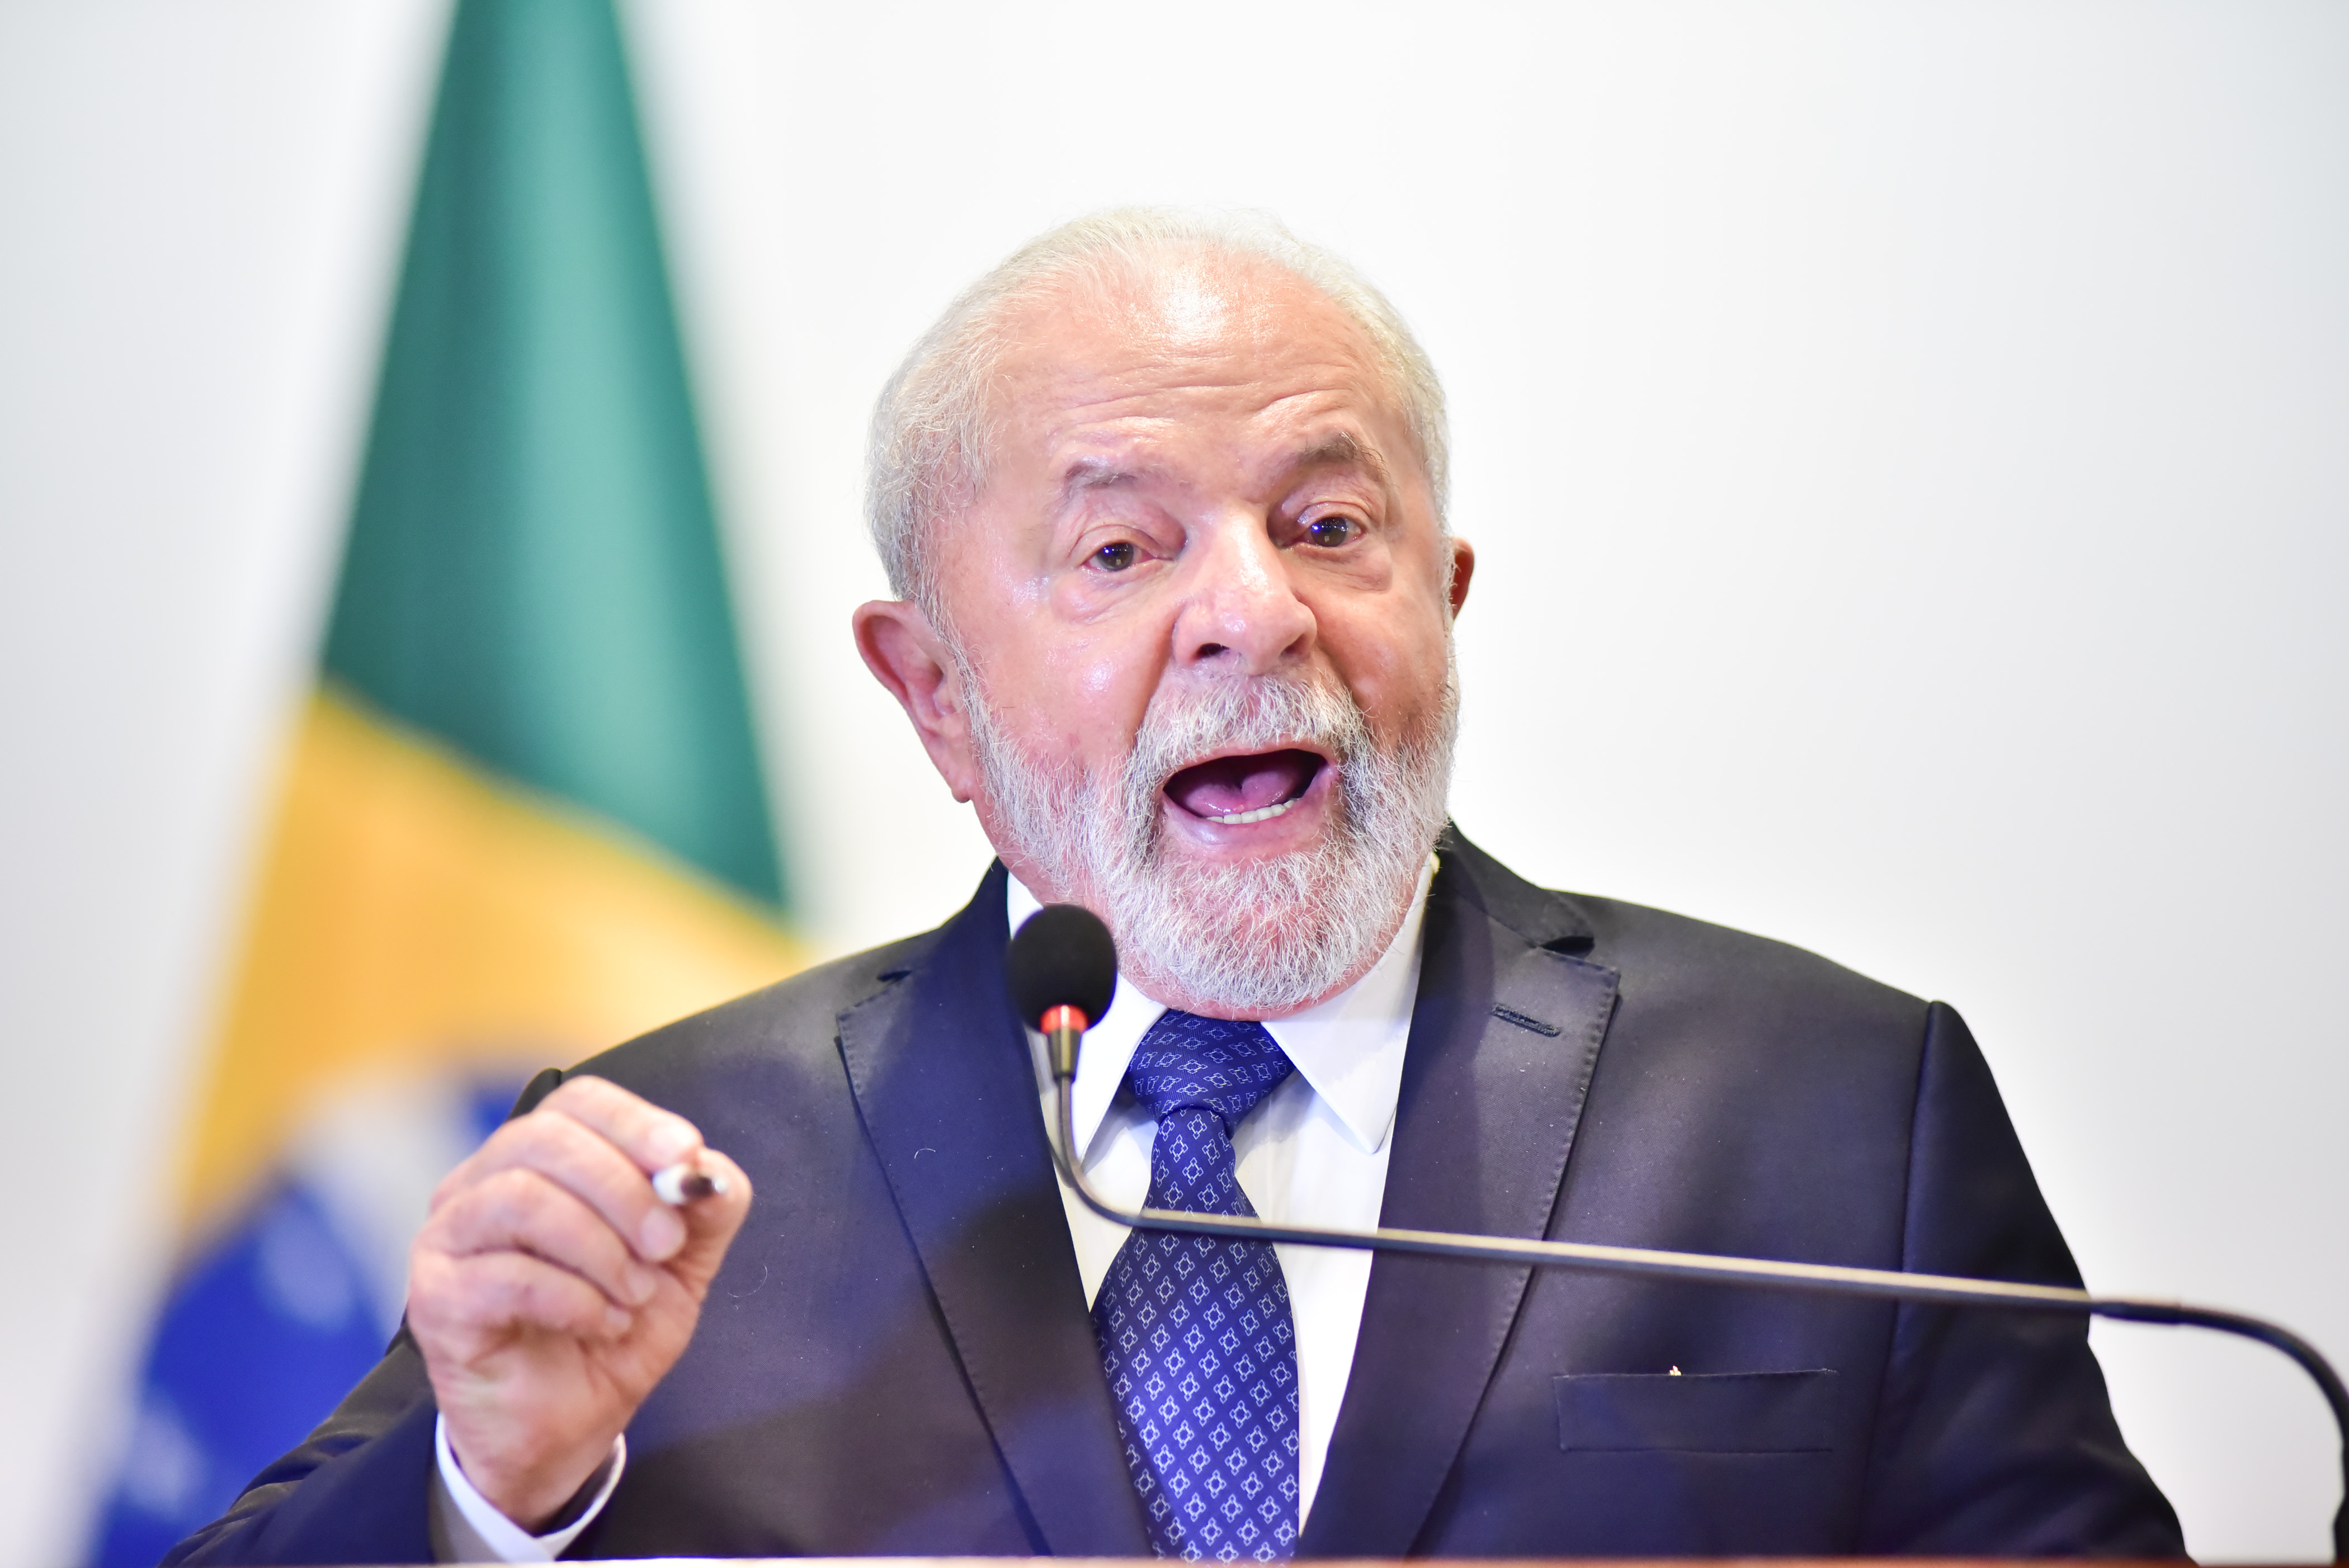 Brazil's Lula Eyes Trips to Africa to Boost Trade, Diplomacy - Bloomberg